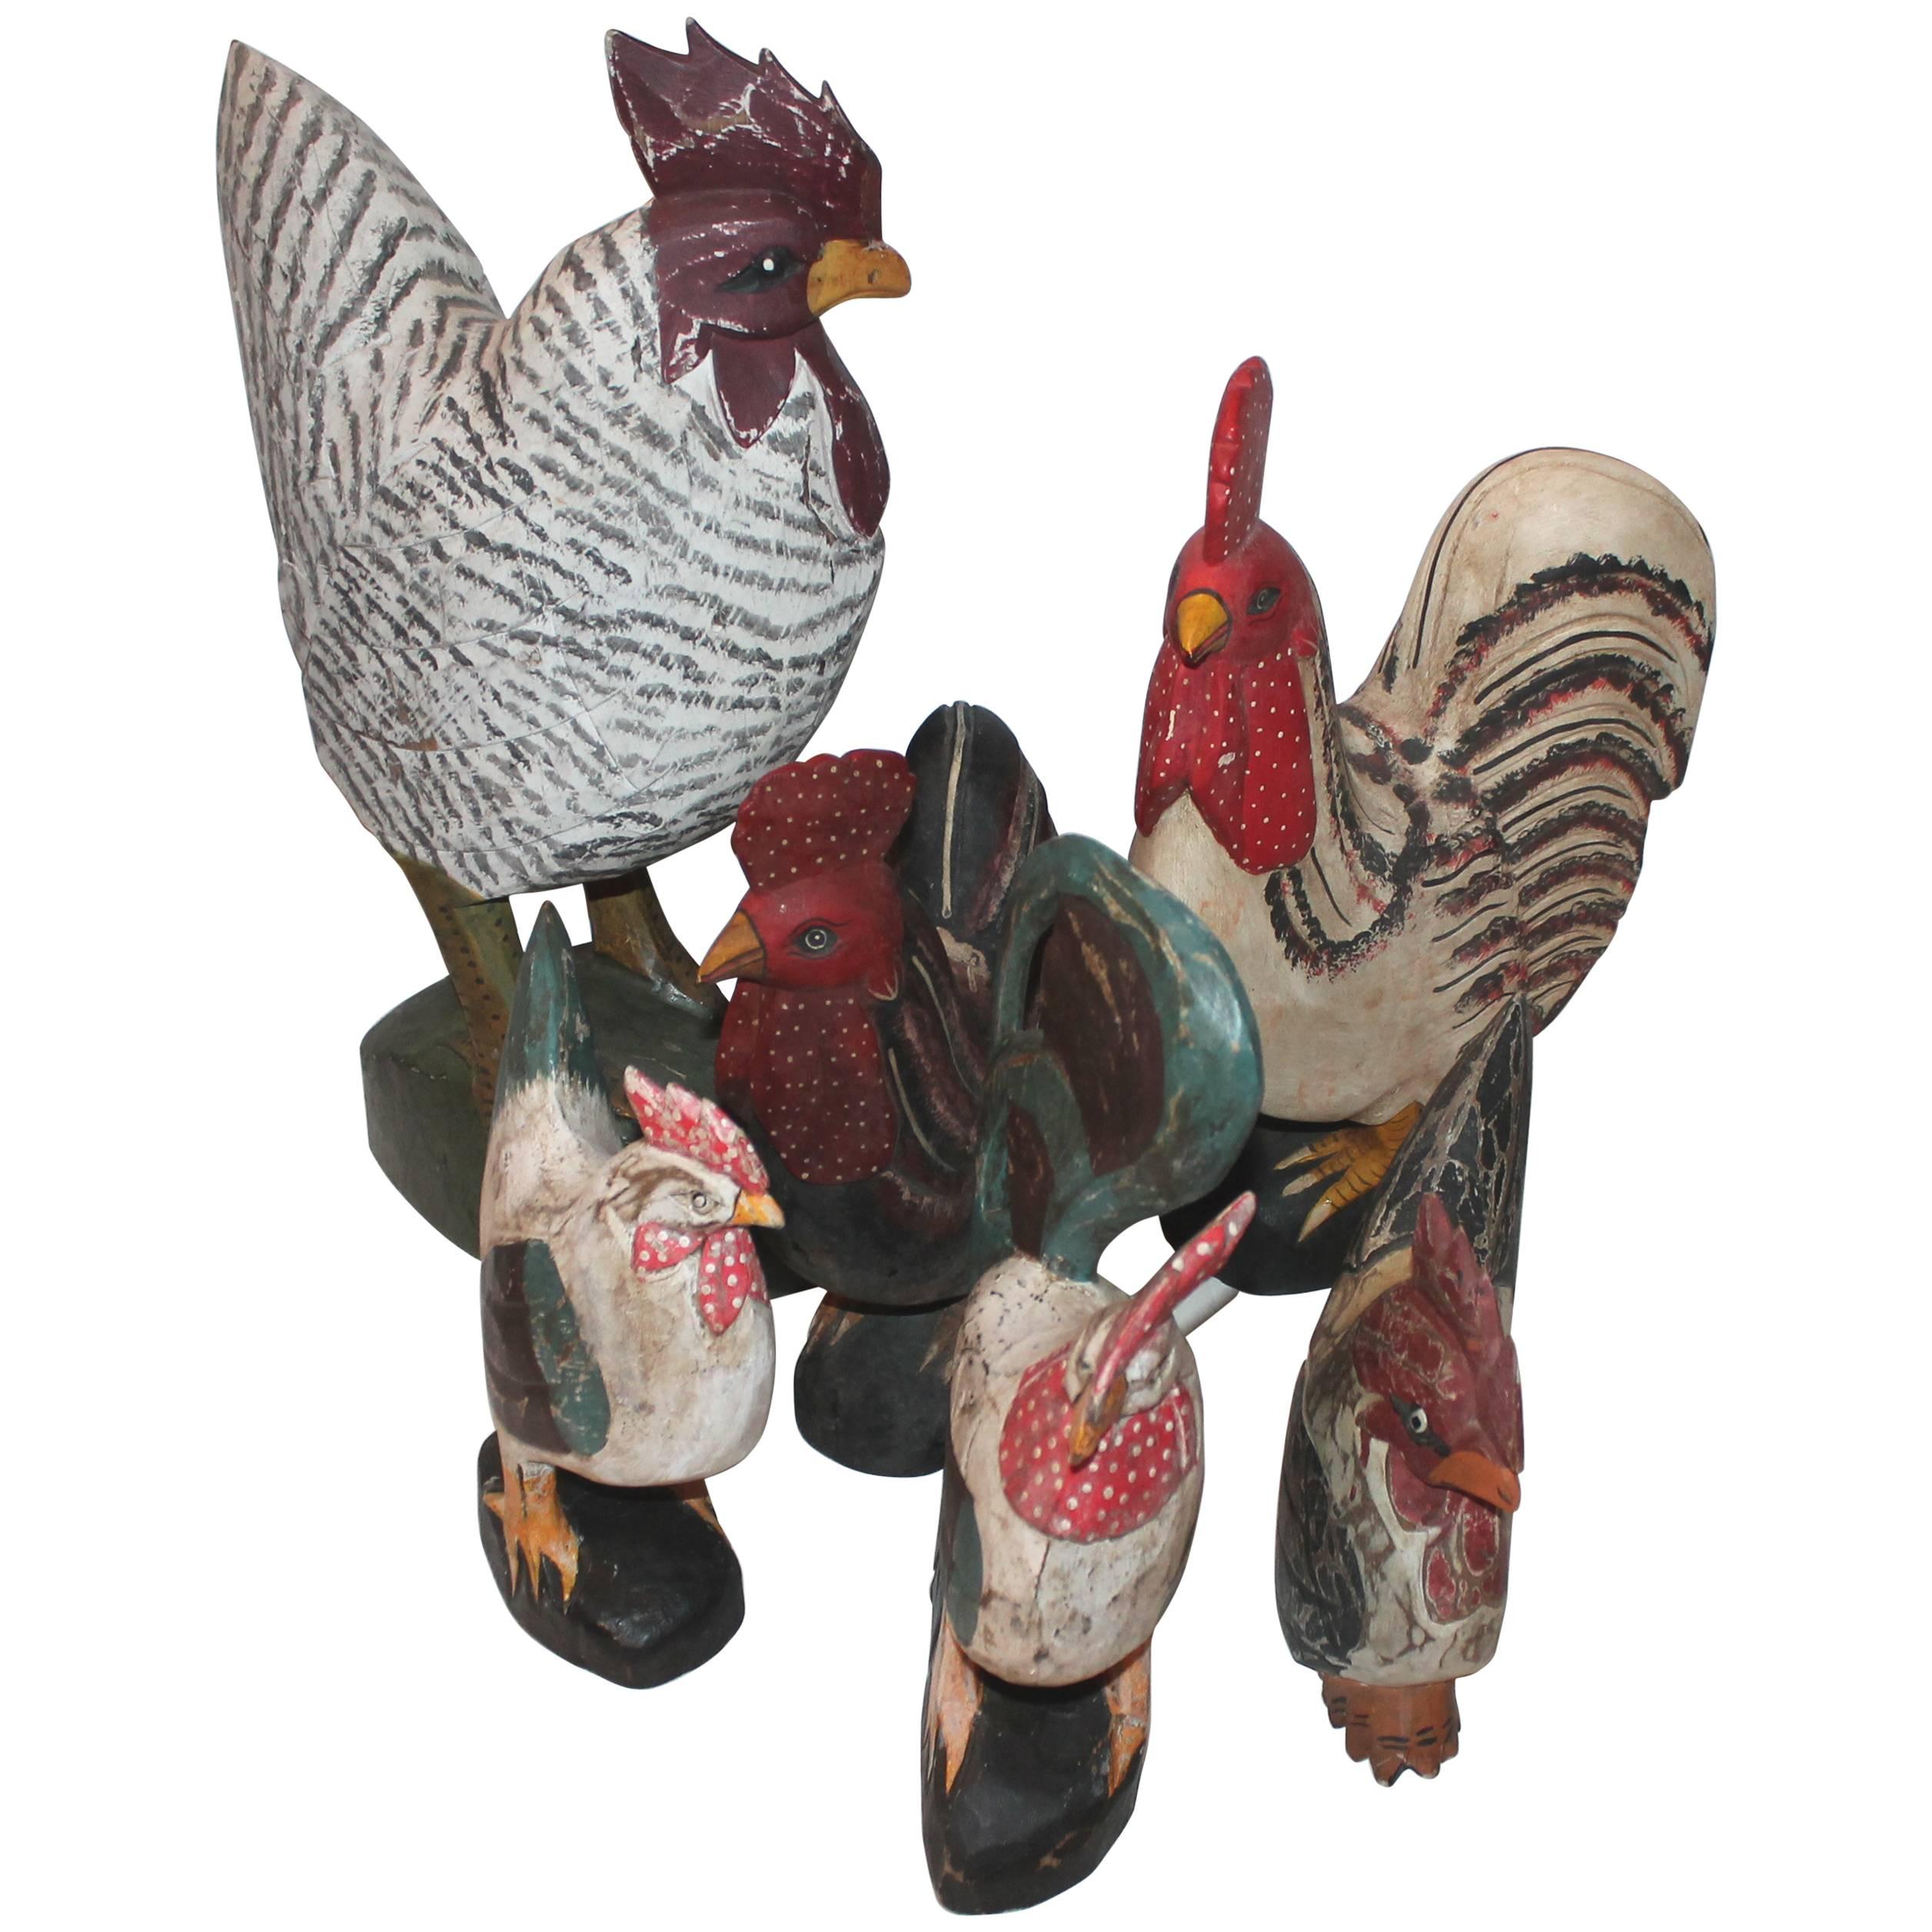 Collection of Six Folk Art Hand-Carved and Painted Roosters